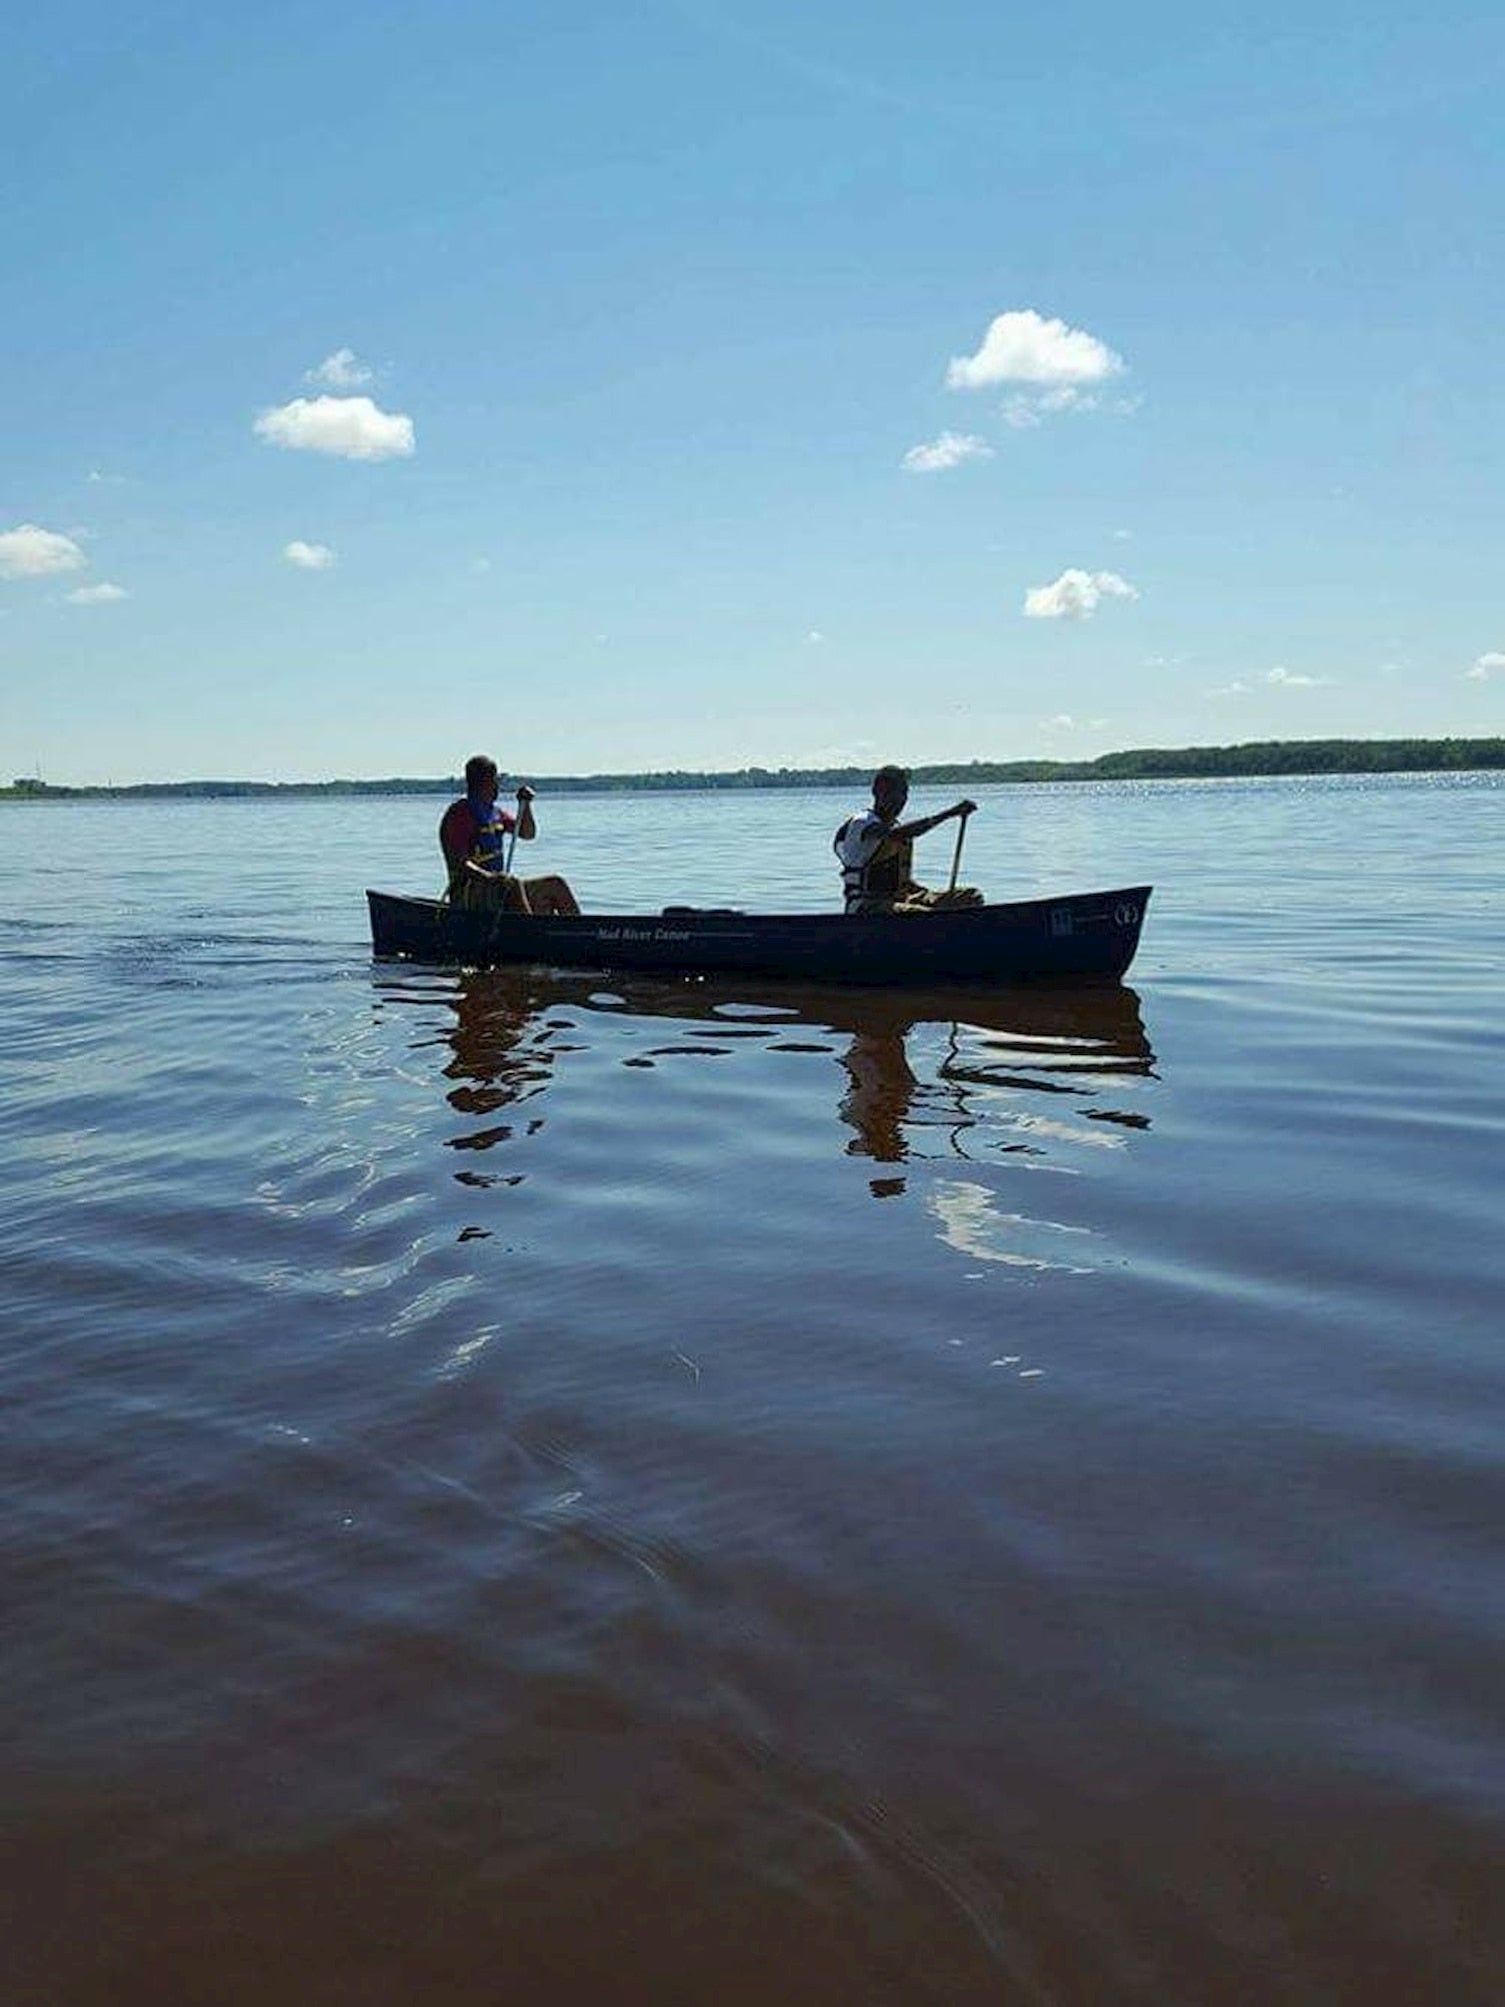 Two people canoeing on a lake.